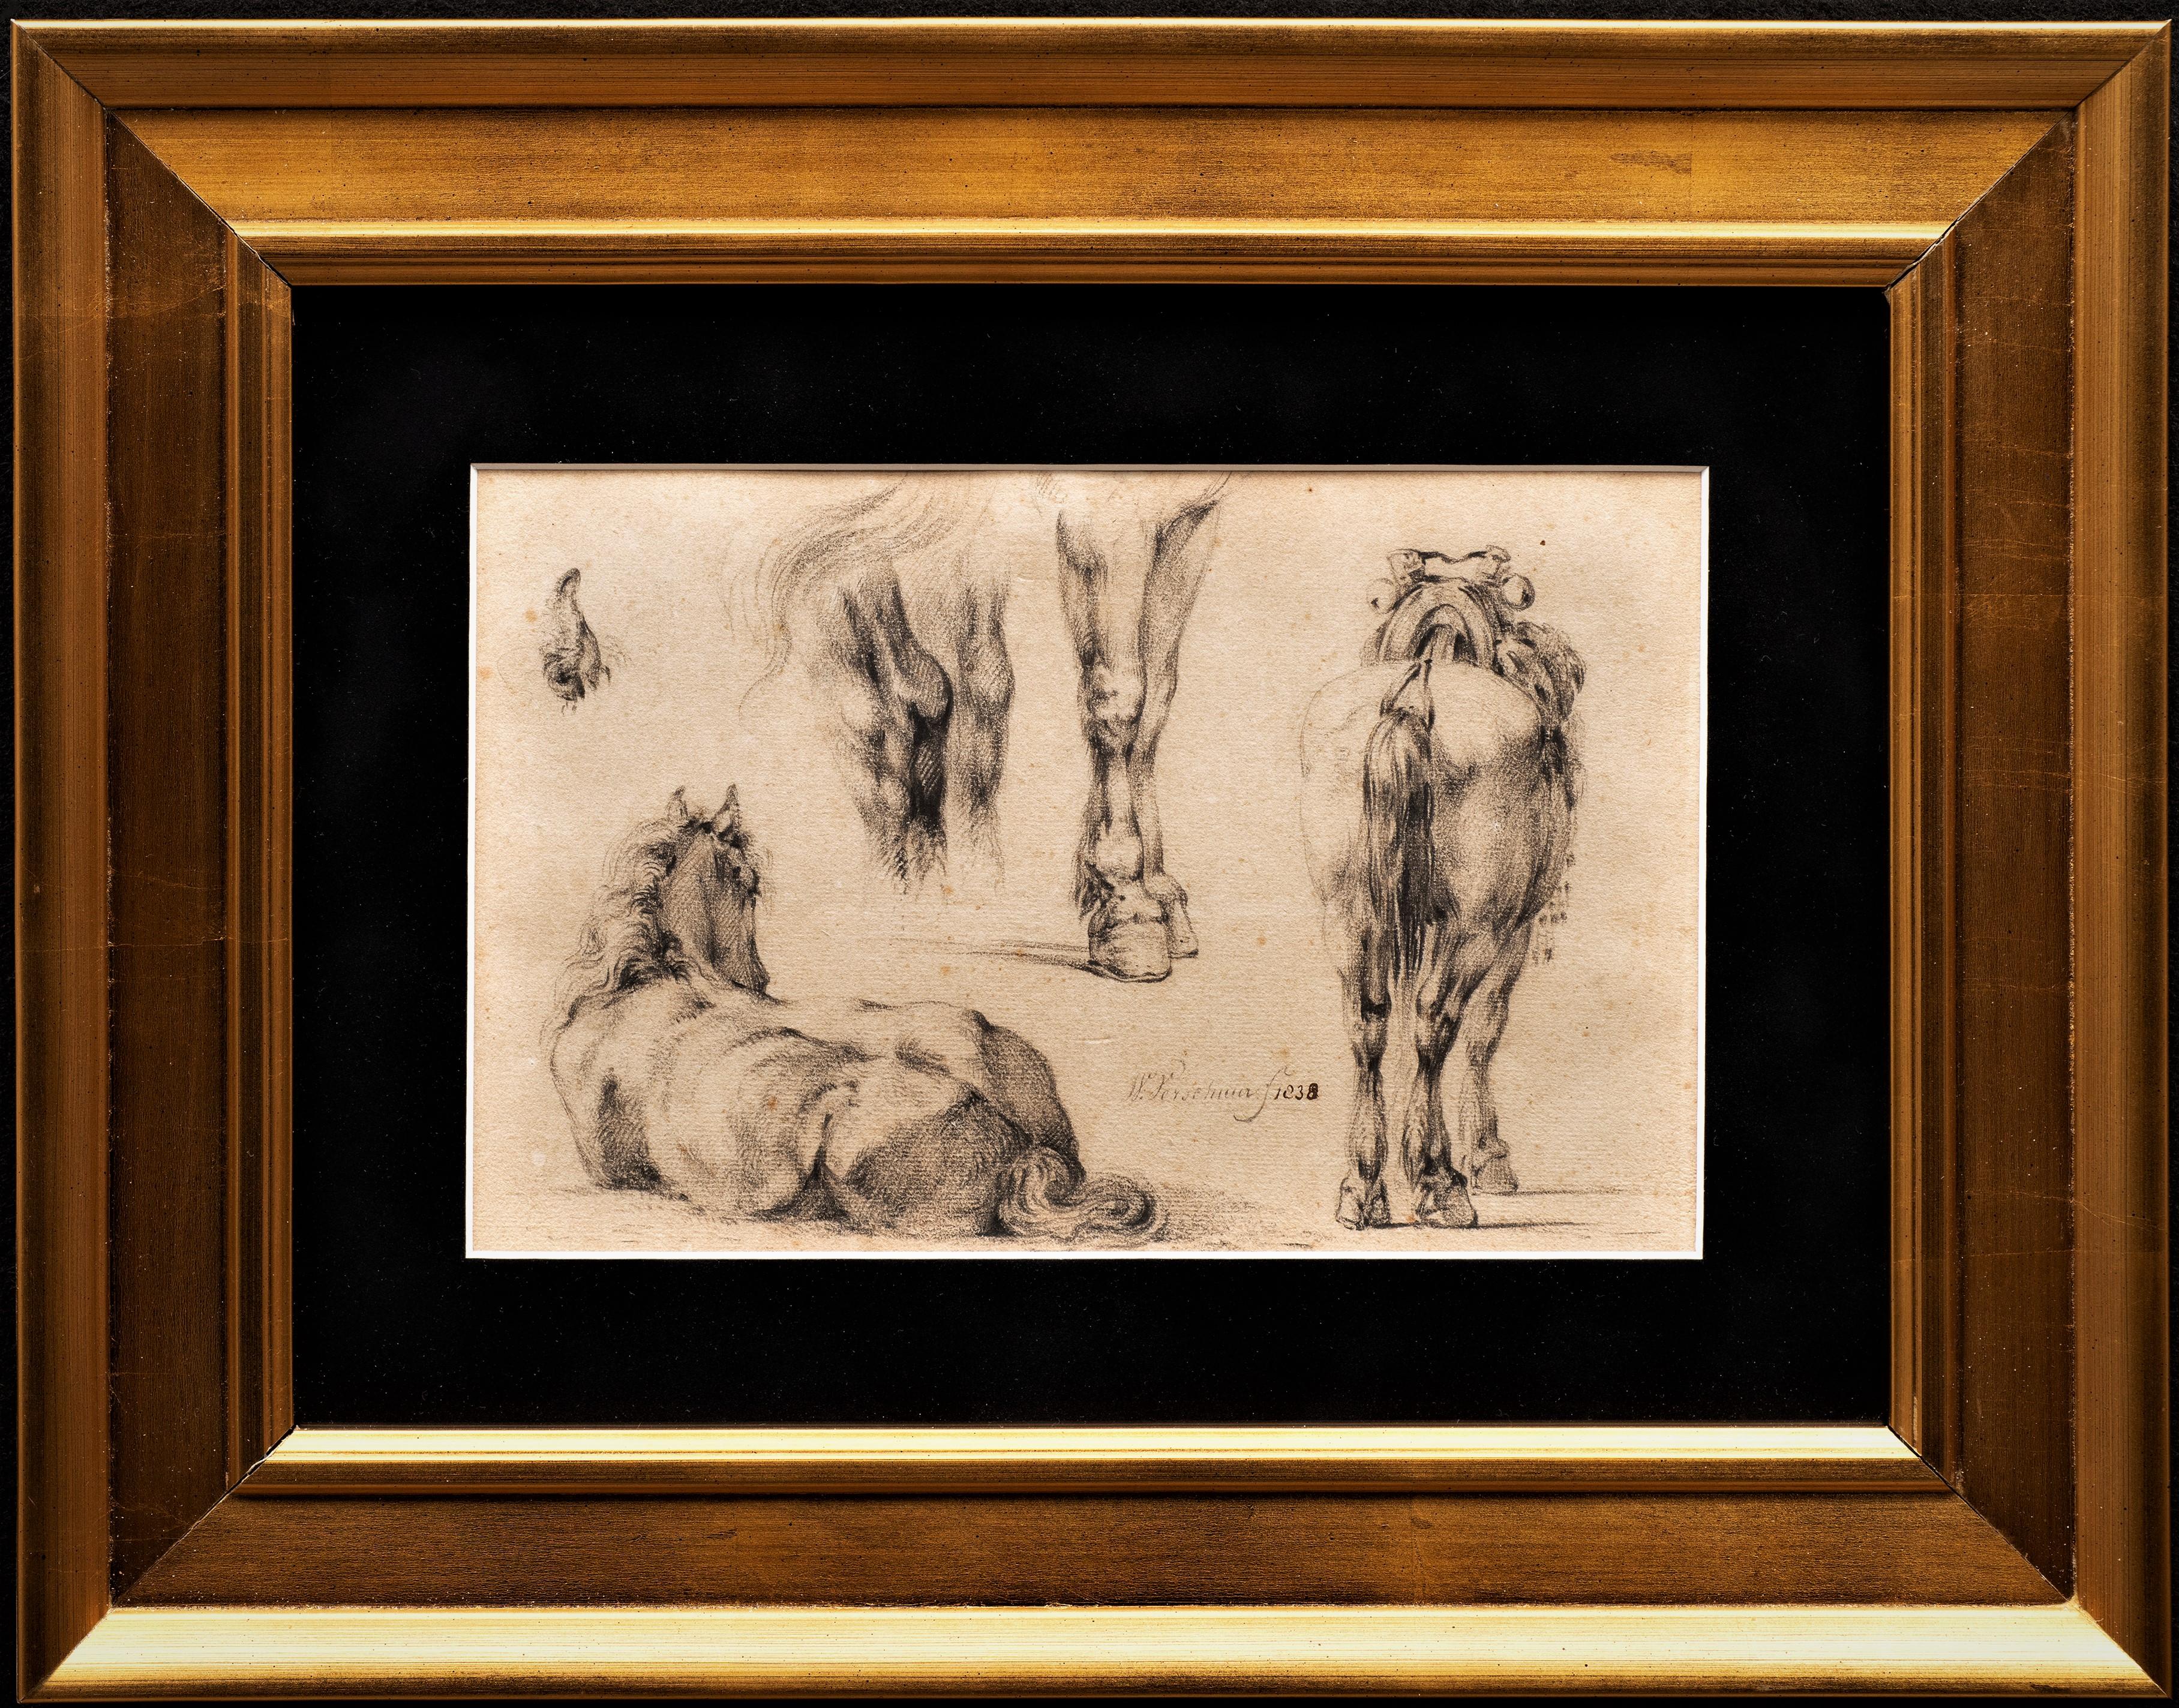 "Study of Horses; Legs and Rumps, 1838" 
Wouterus Verschuur l (Dutch, 1812-1874)
Pencil on paper
Signed and Dated "W Verschuur 1838"
10 x 6 1/2 (17 1/2 x 14 frame) inches

In his time Wouterus Verschuur was an acclaimed and celebrated painter of